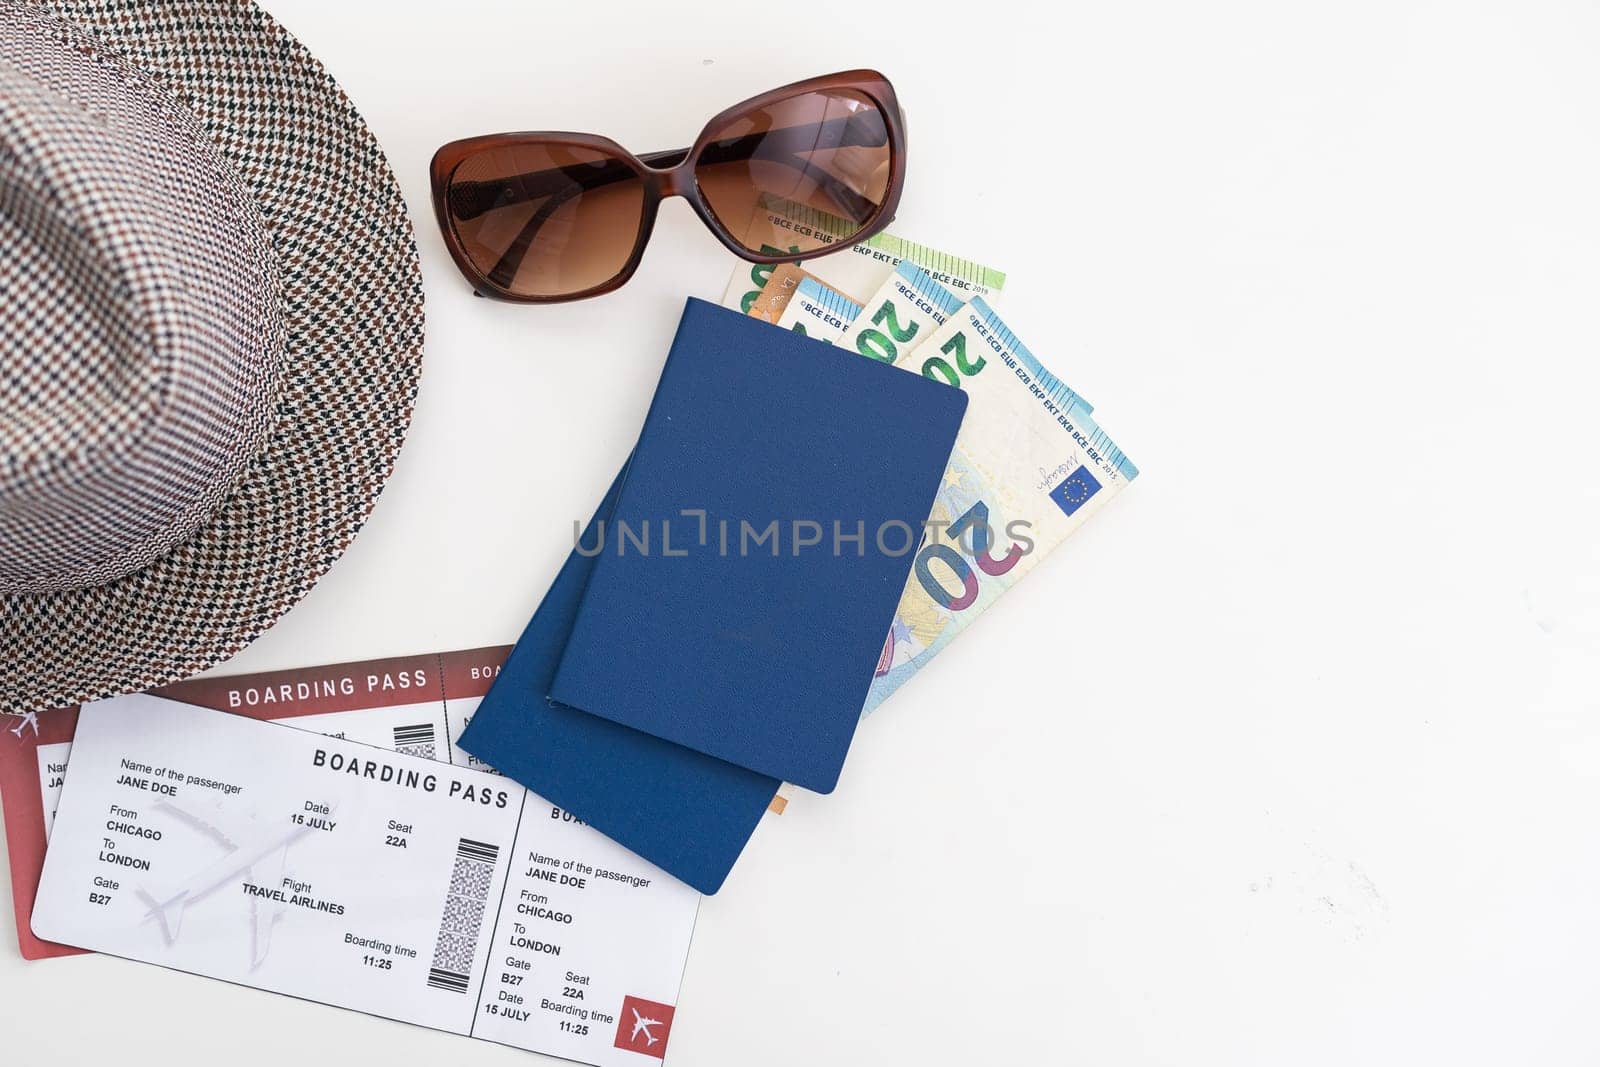 Top view of traveler accessories, hat, glasses, camera, passports and air tickets on background with copy space for text. Travel vacation concept.